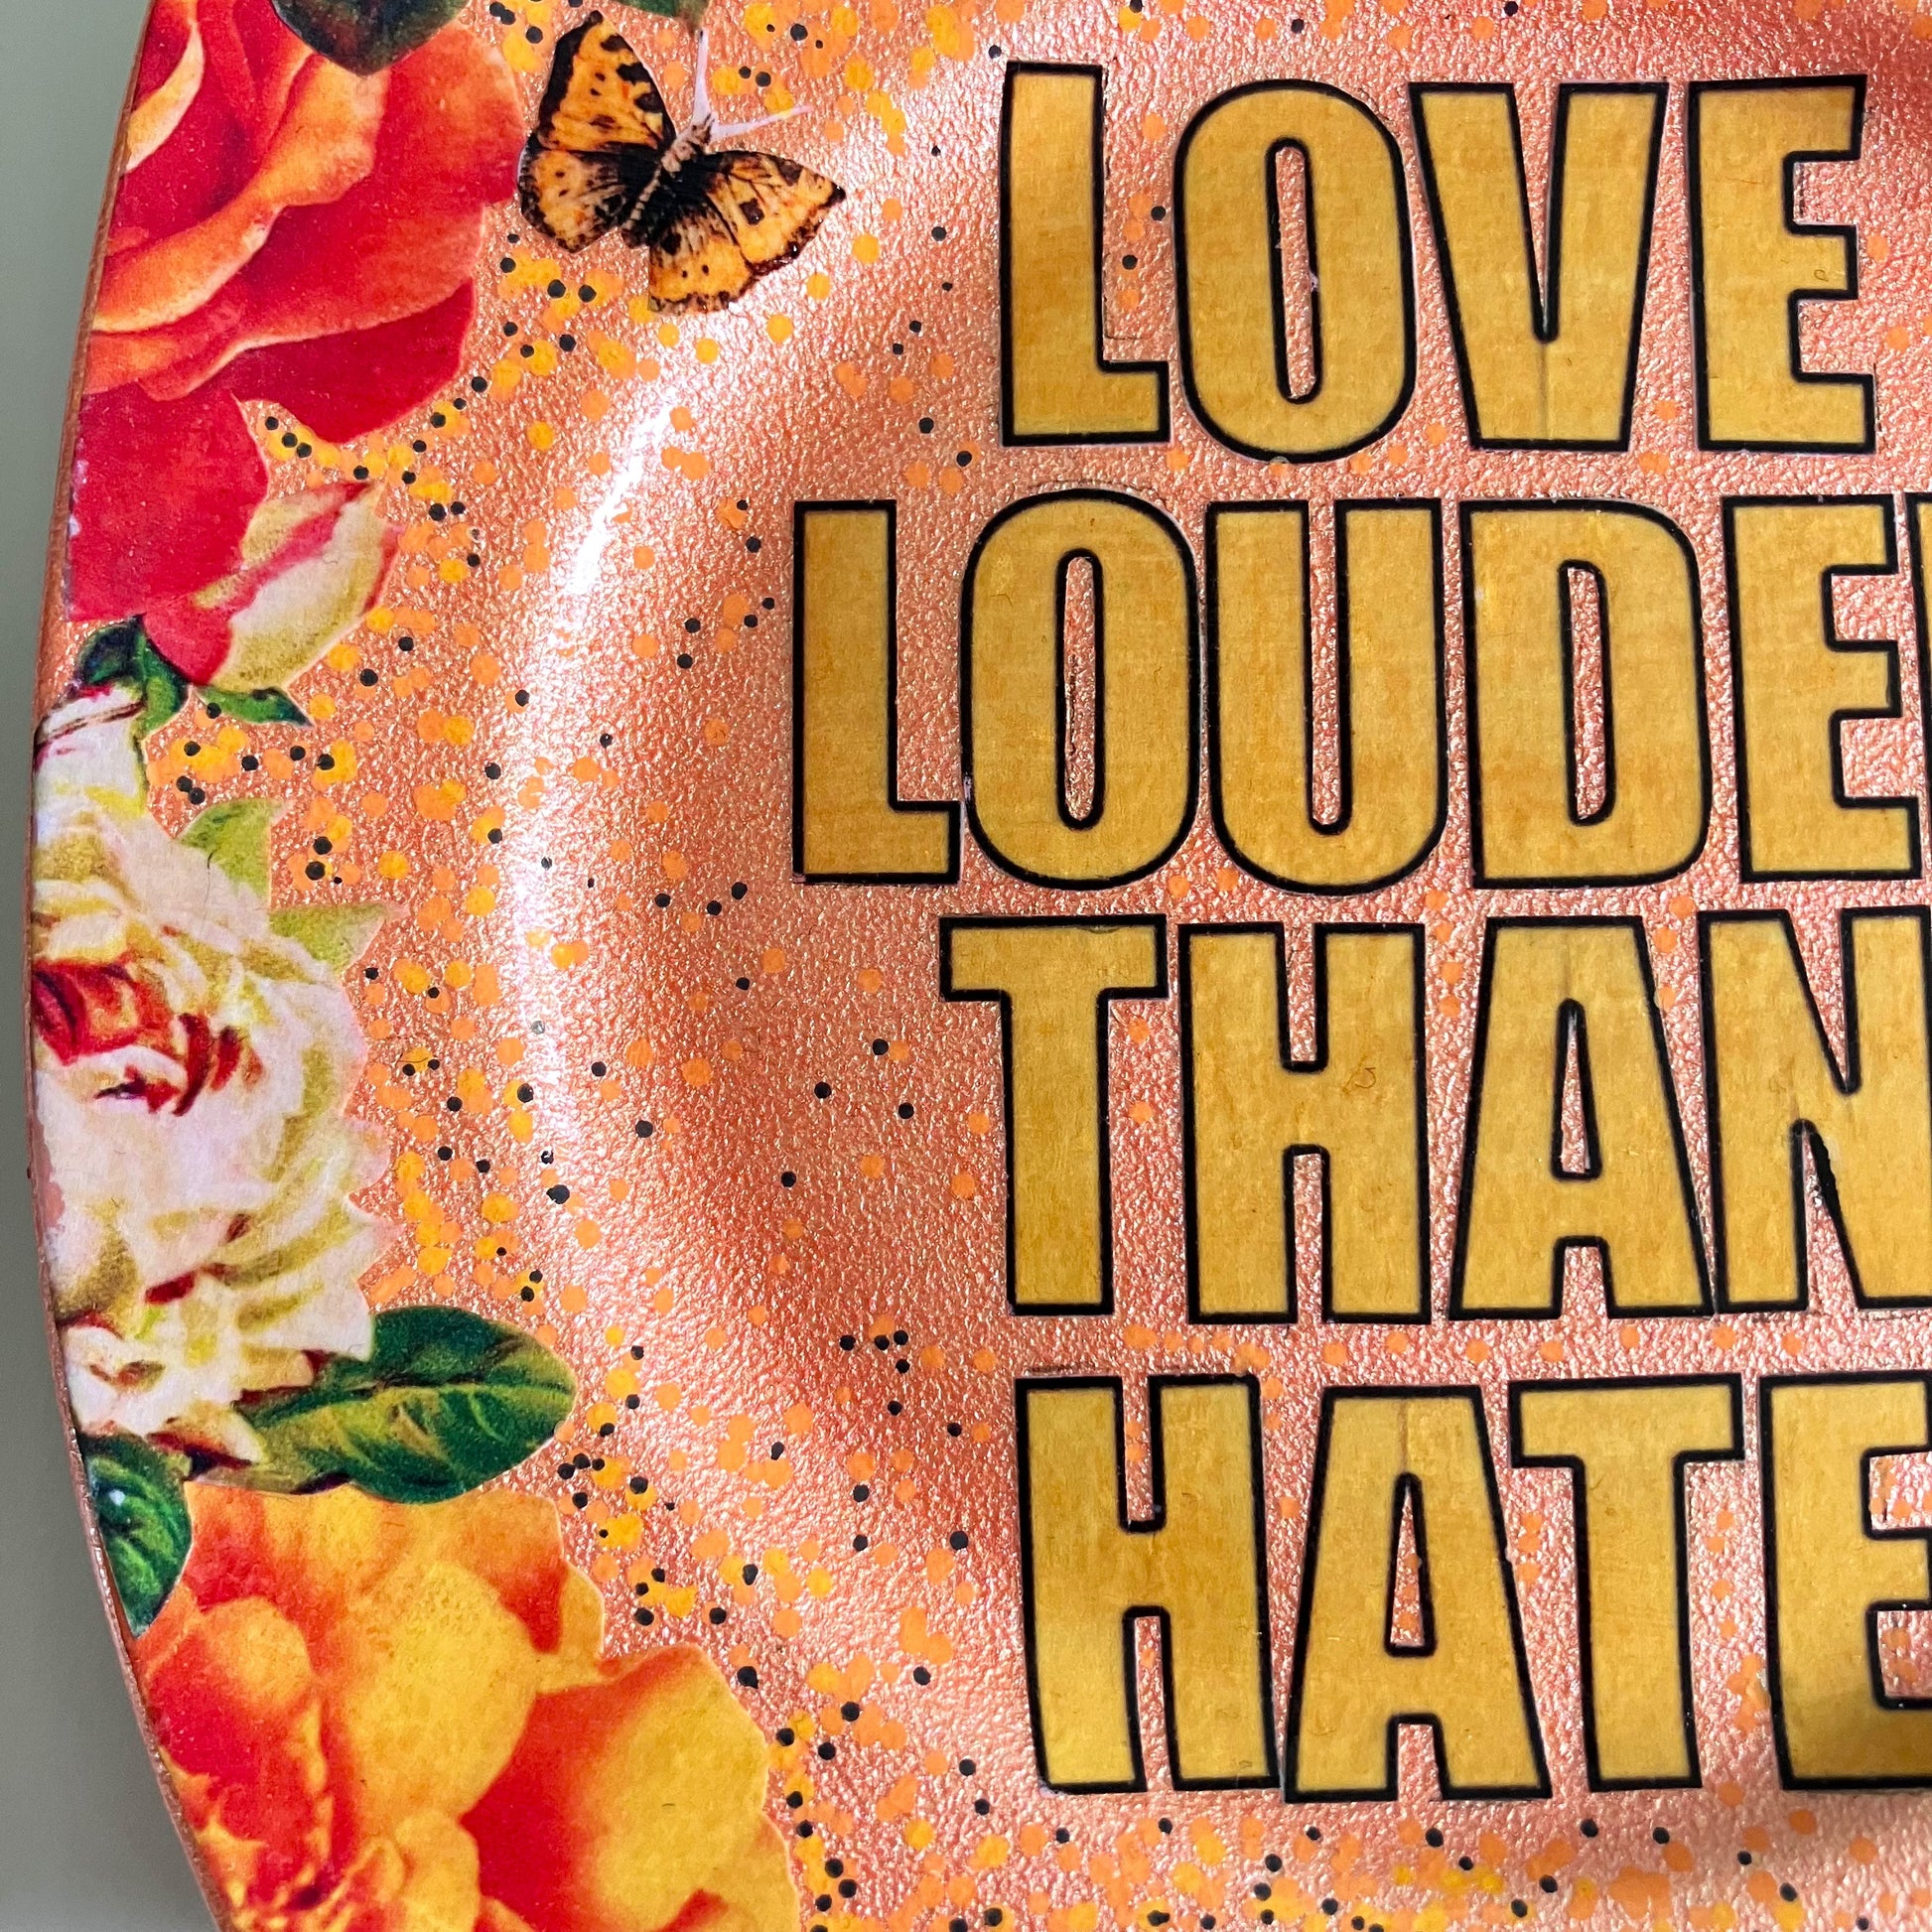 "Love Louder Than Hate" Upcycled Wall Plate by House of Frisson, featuring a collage of the words "love louder than hate" set against a peach background and framed by roses. Closeup details showing the collage artwork.